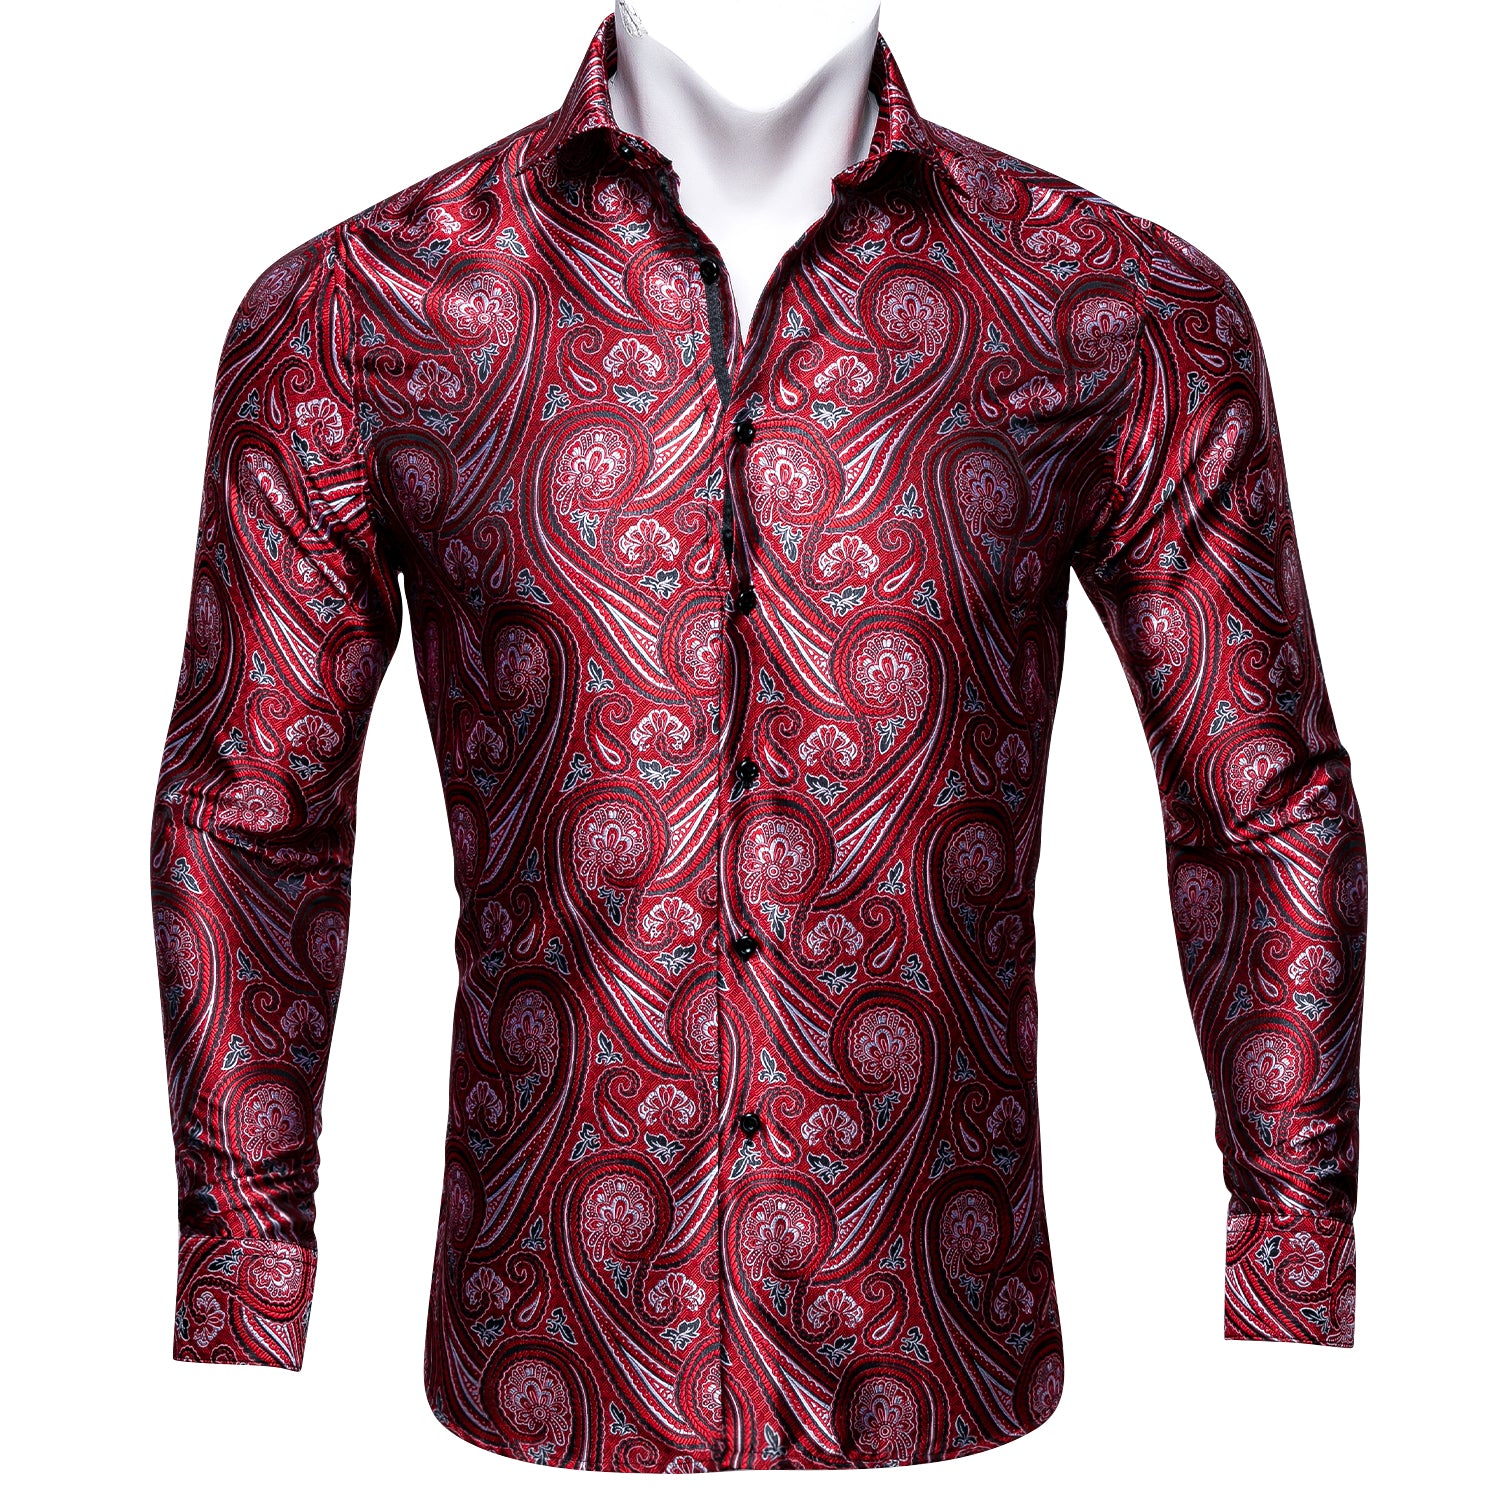 nice casual shirts for men